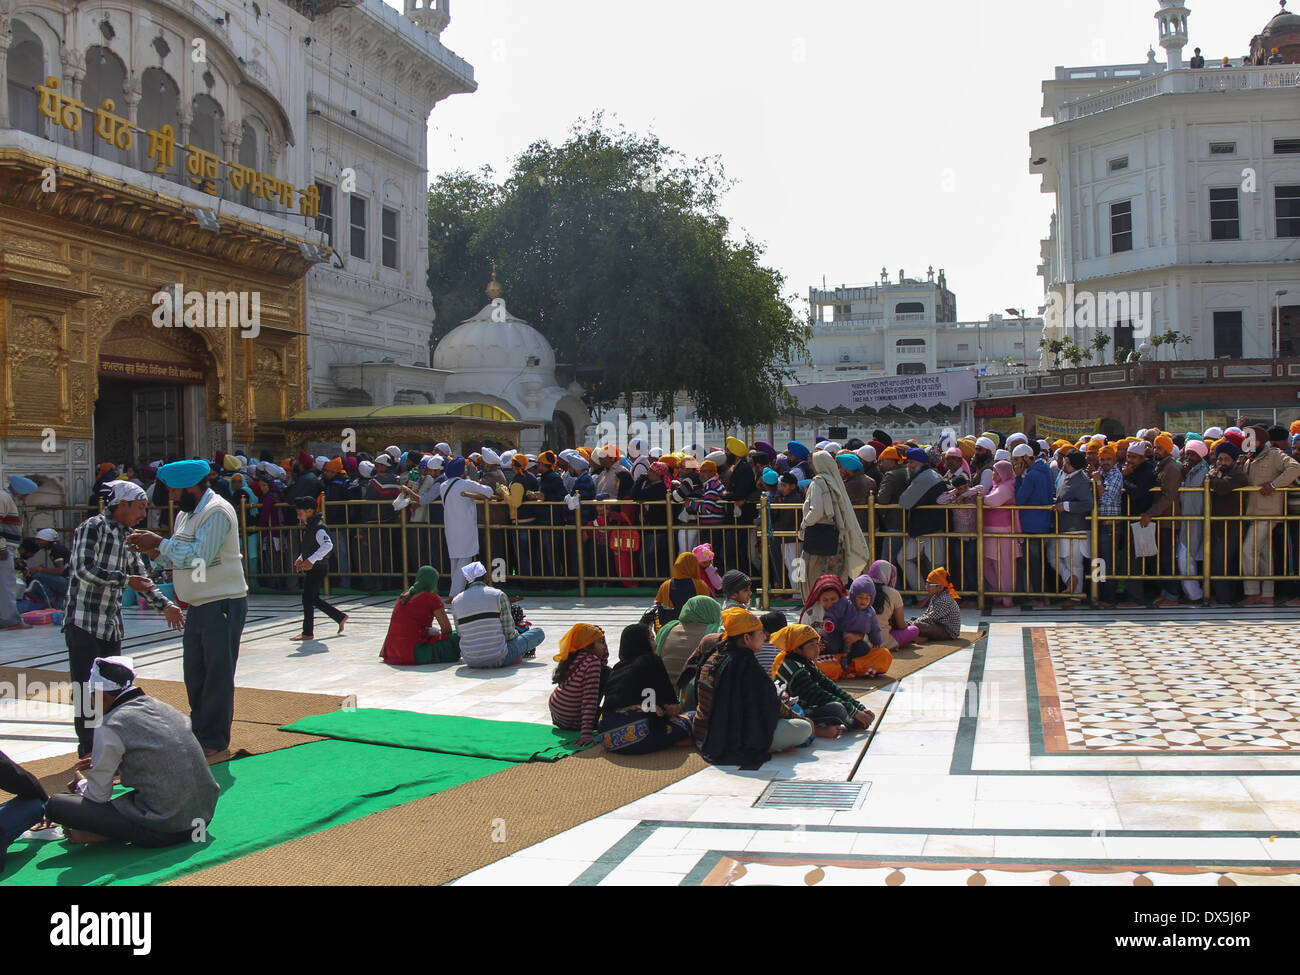 Queue of devotees with some sitting in the Golden Temple in Amritsar, being a holiday, huge rush of devotees to visit Sikh site Stock Photo